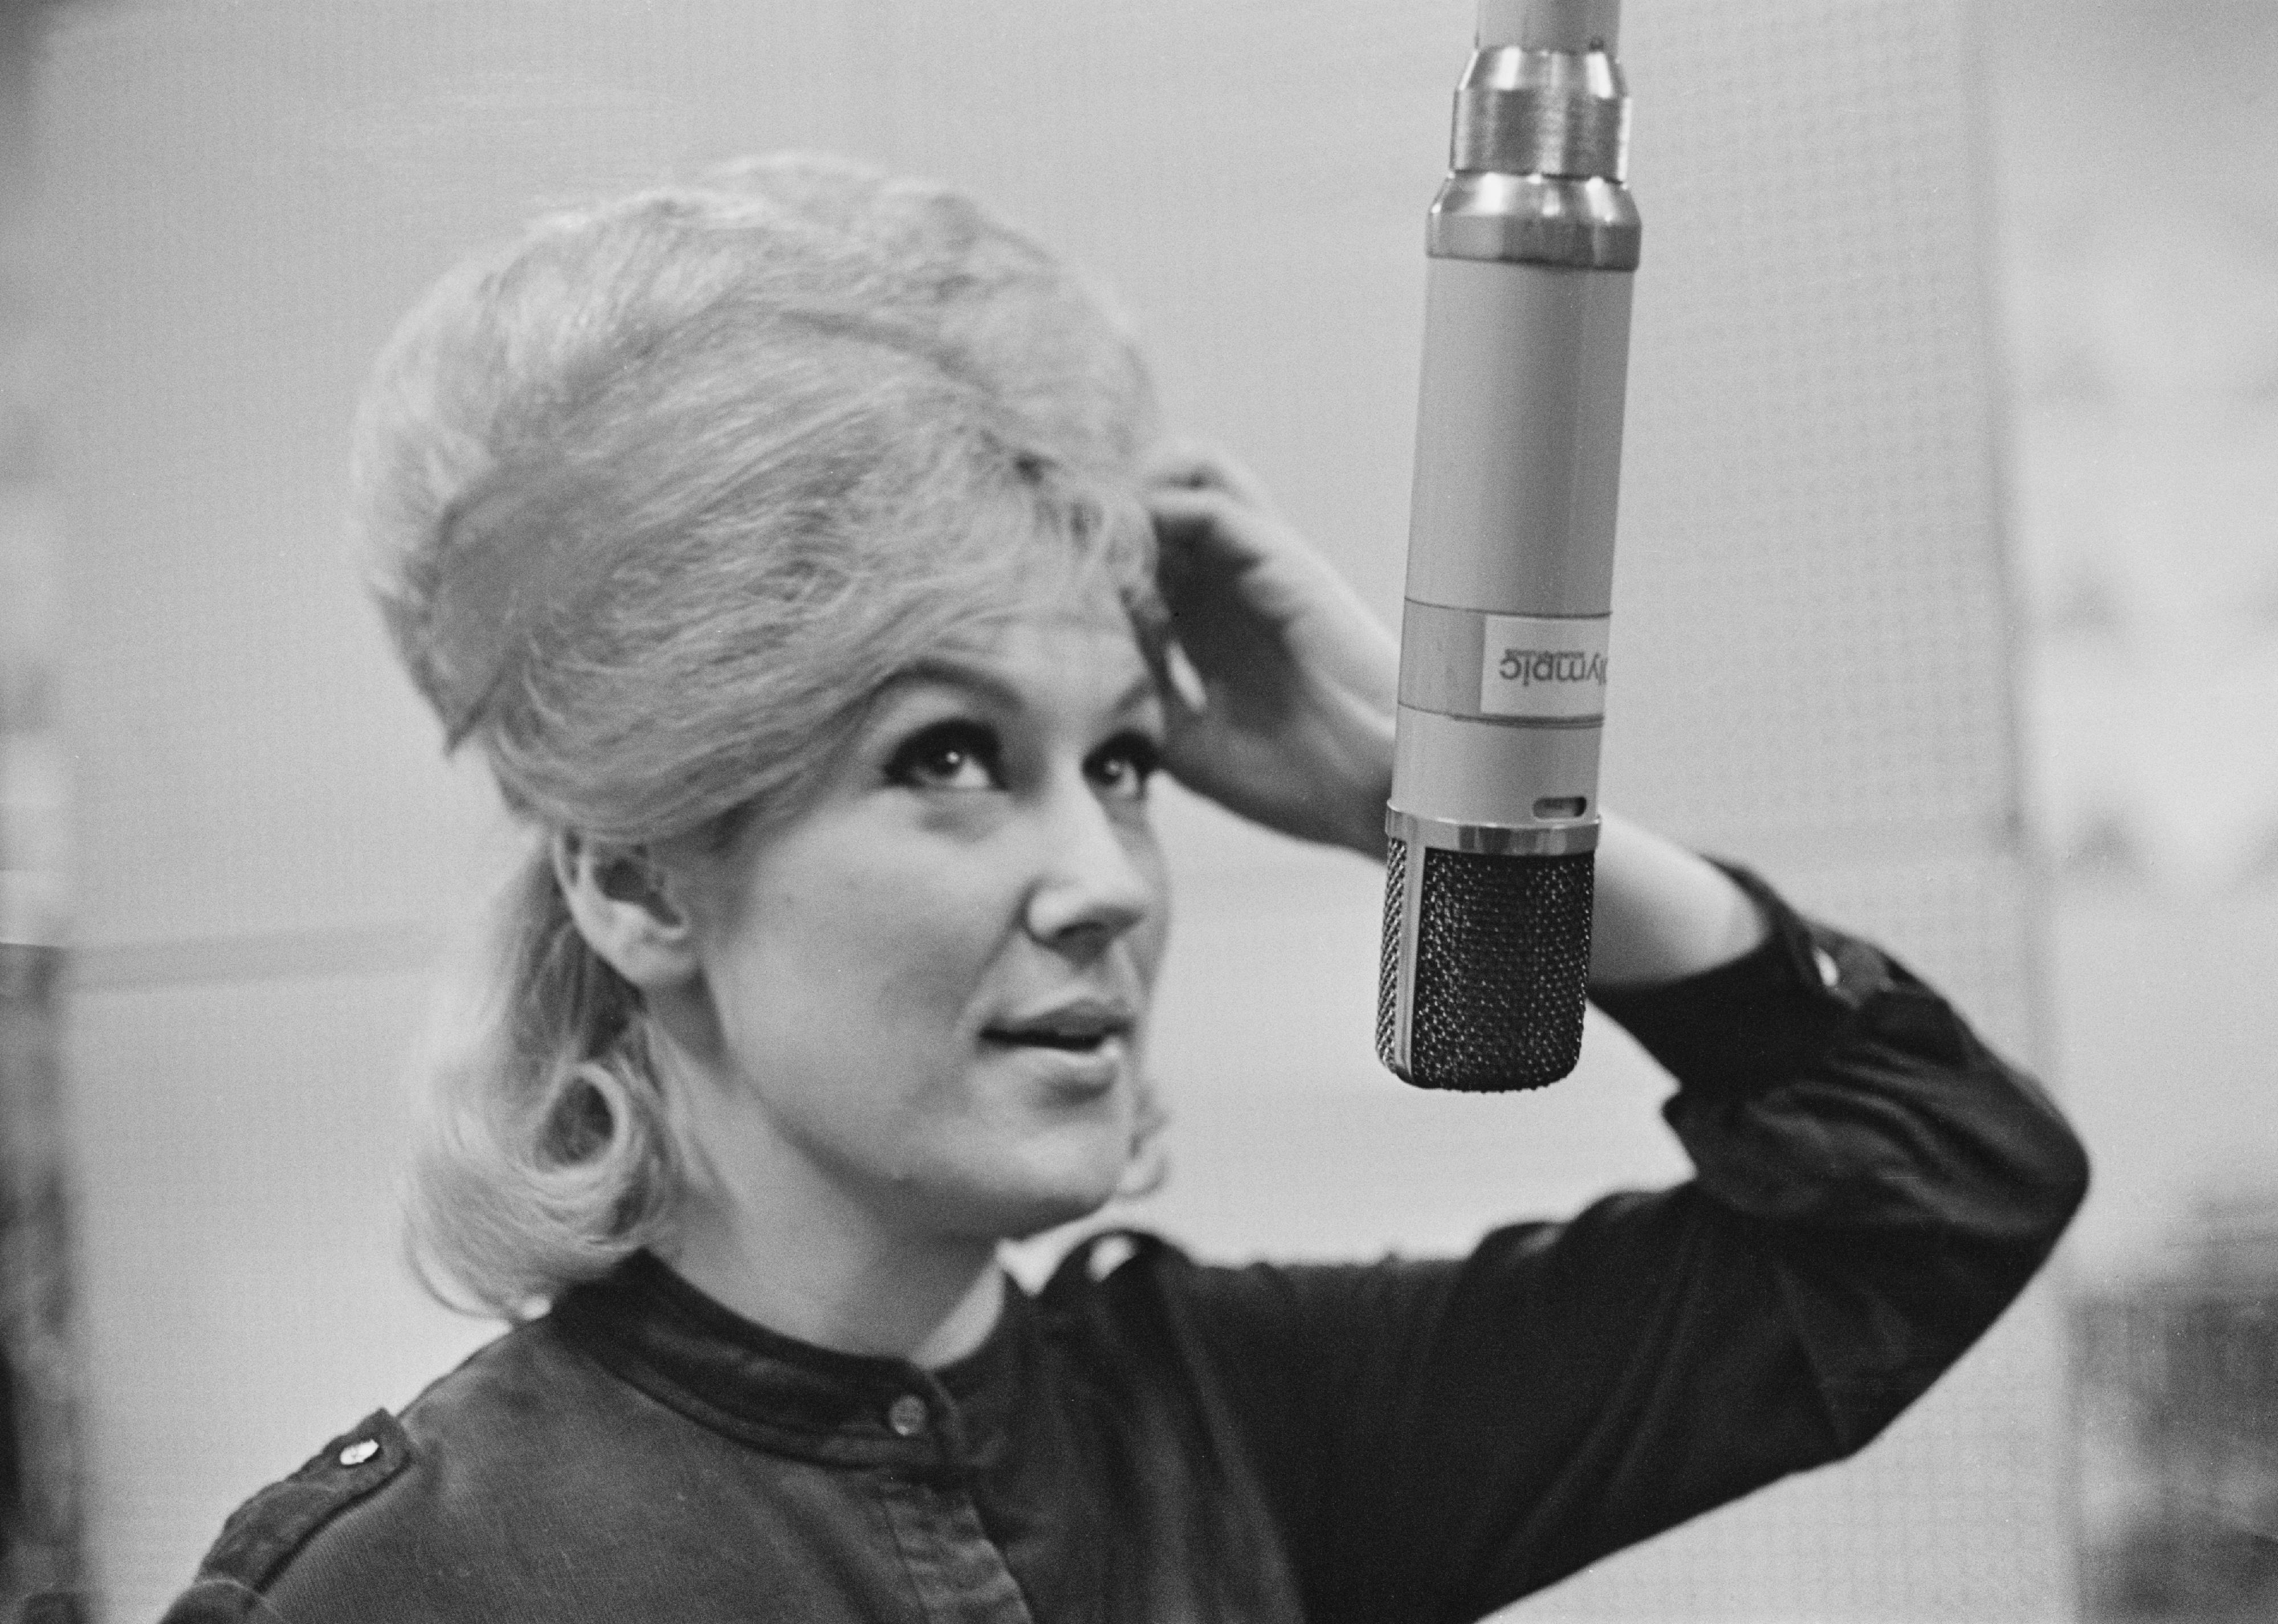 Dusty Springfield singing into a studio microphone.